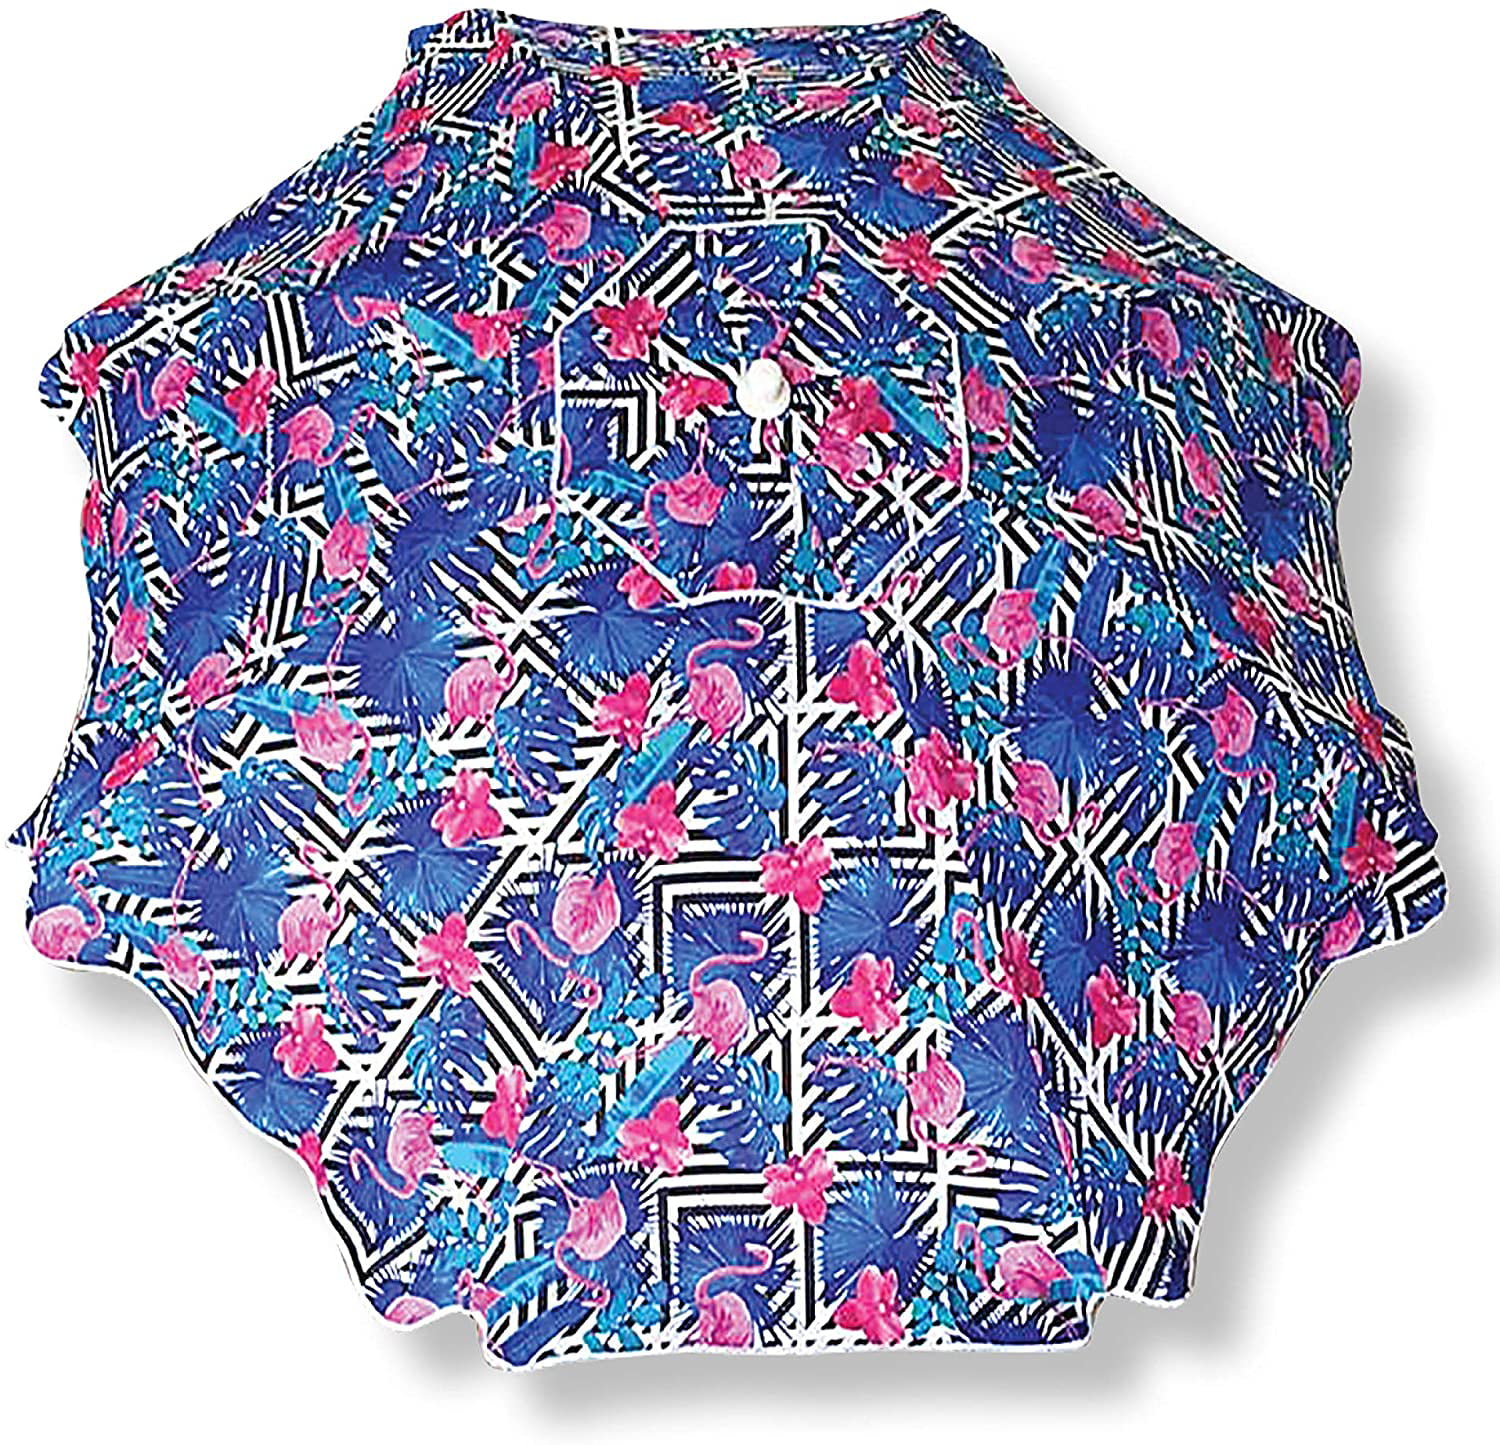 Beach And Grass Umbrella With Matching Travel Carrying Bag Large 7 Feet 5 Inch